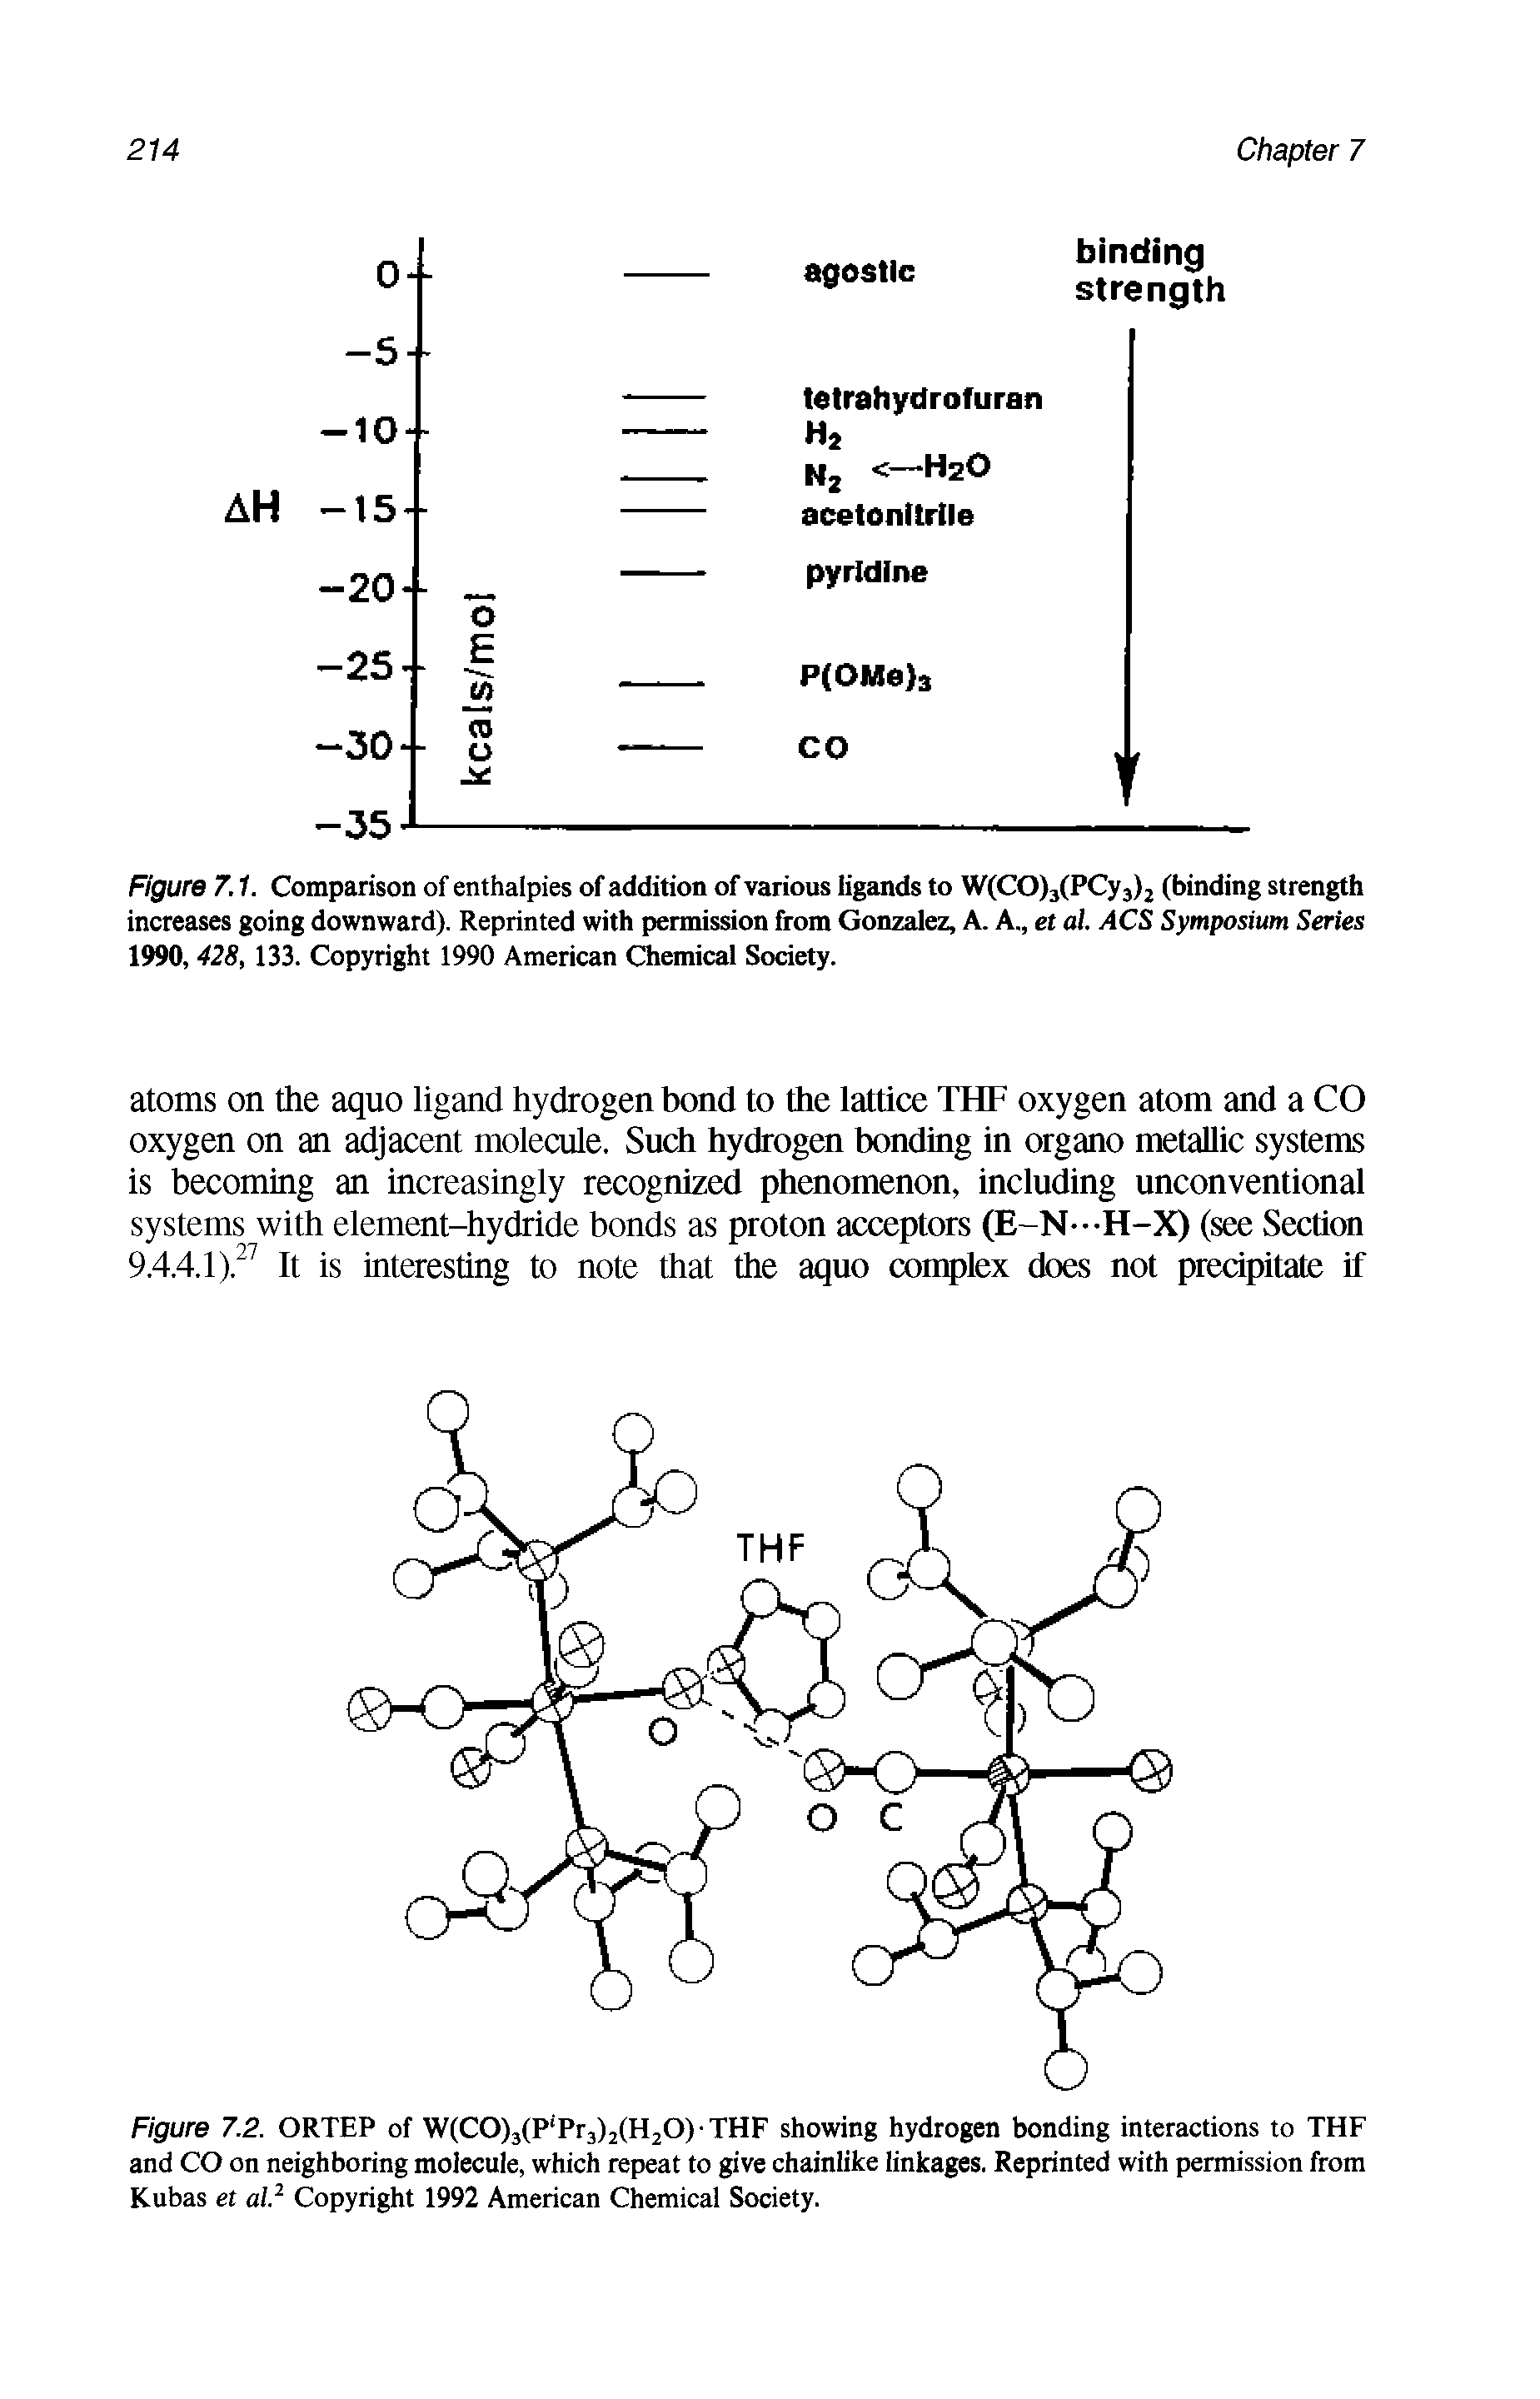 Figure 7.1. Comparison of enthalpies of addition of various ligands to W(CO)3(PCy3)2 (binding strength increases going downward). Reprinted with permission from Gonzalez, A. A., et at. ACS Symposium Series 1990, 428, 133. Copyright 1990 American Chemical Society.